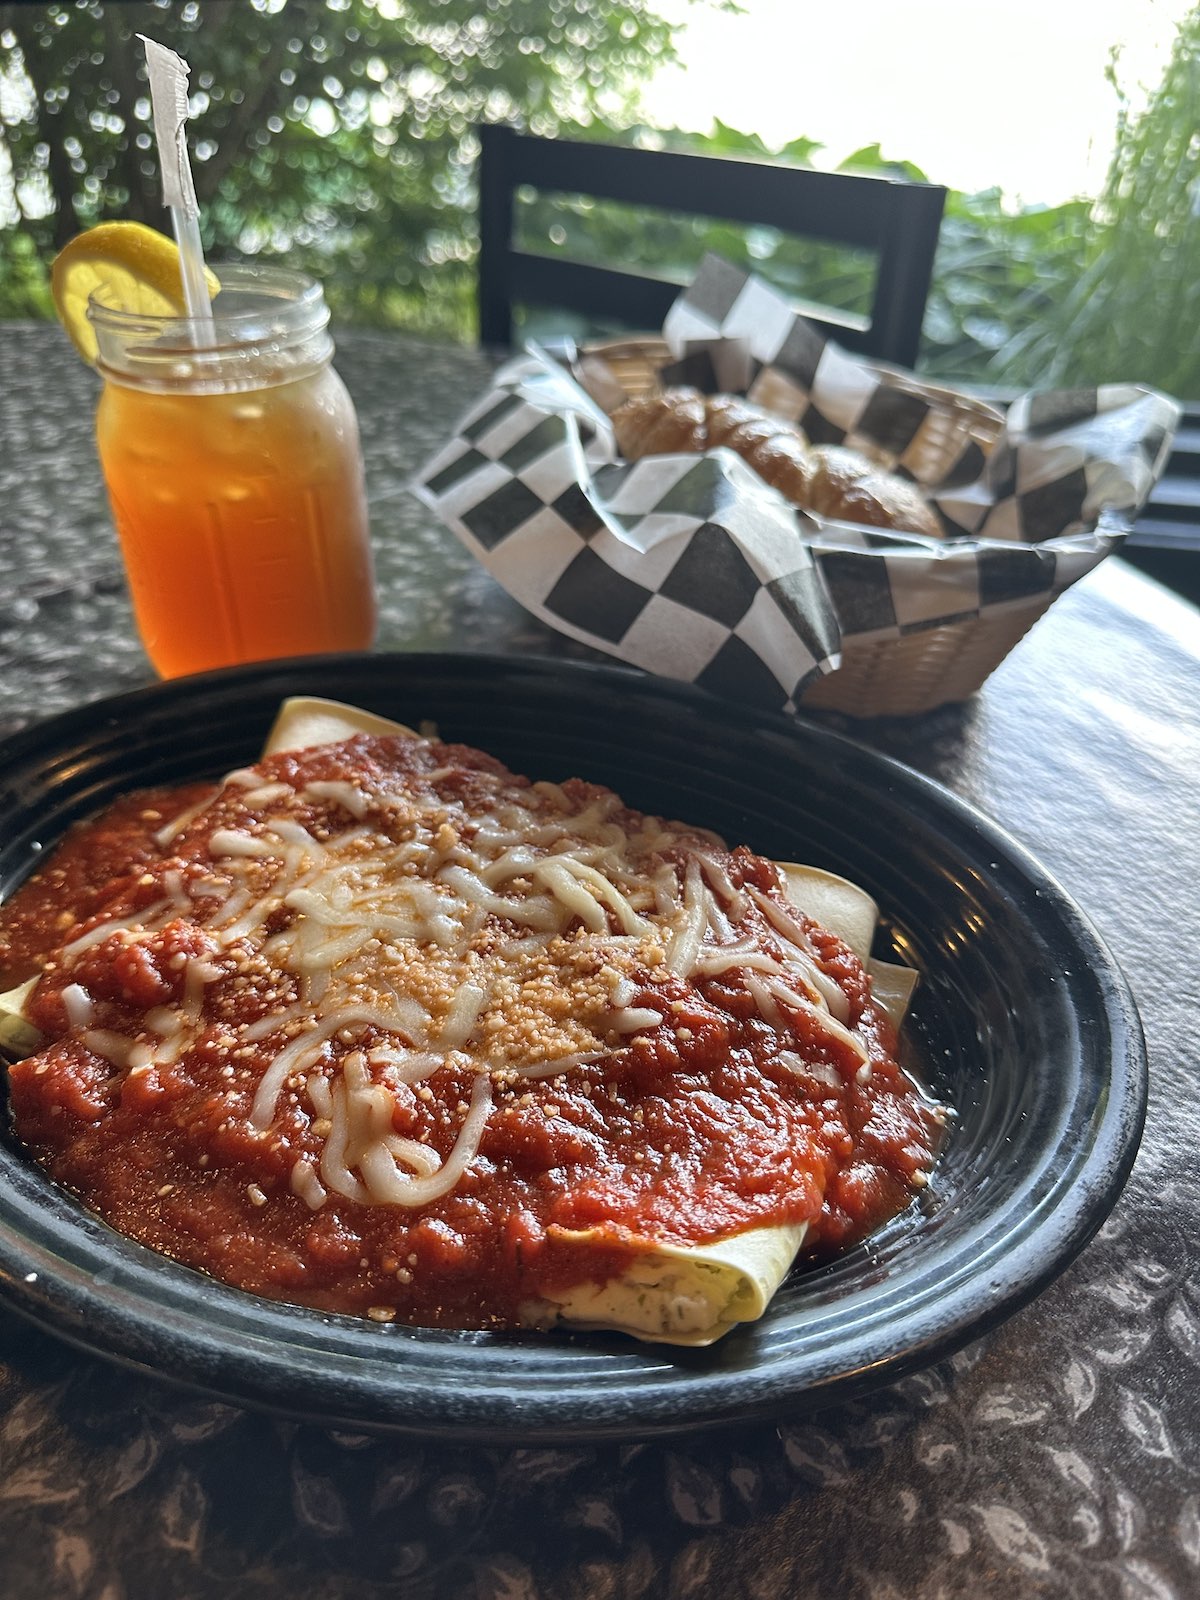 Rich ricotta-stuffed manicotti topped with savory marinara sauce and a blend of melted Italian cheeses, presented at The Italian Oven in Somerset, PA